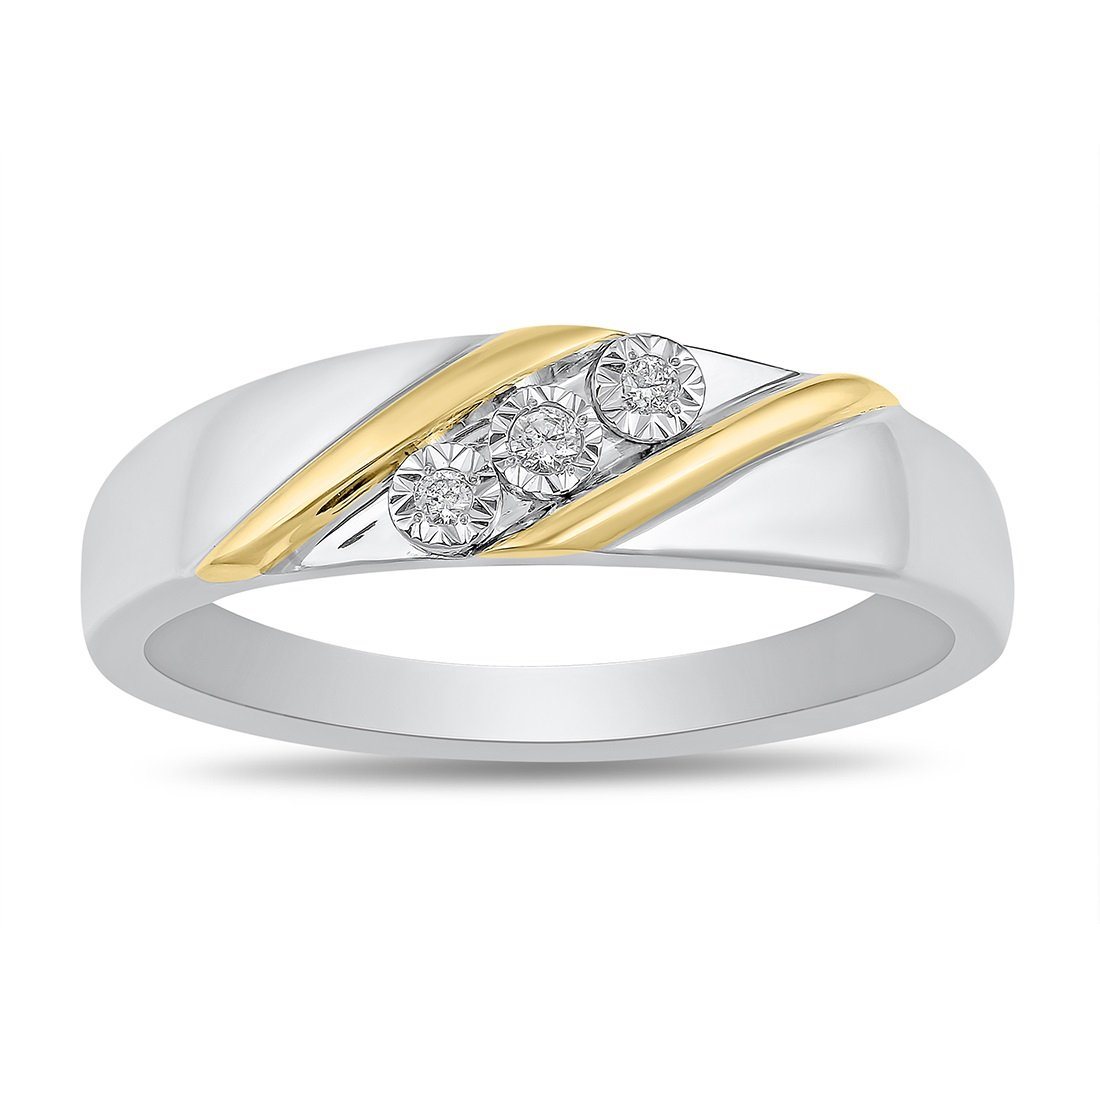 Men's Diamond Ring in Sterling Silver & 9ct Yellow Gold Rings Bevilles 